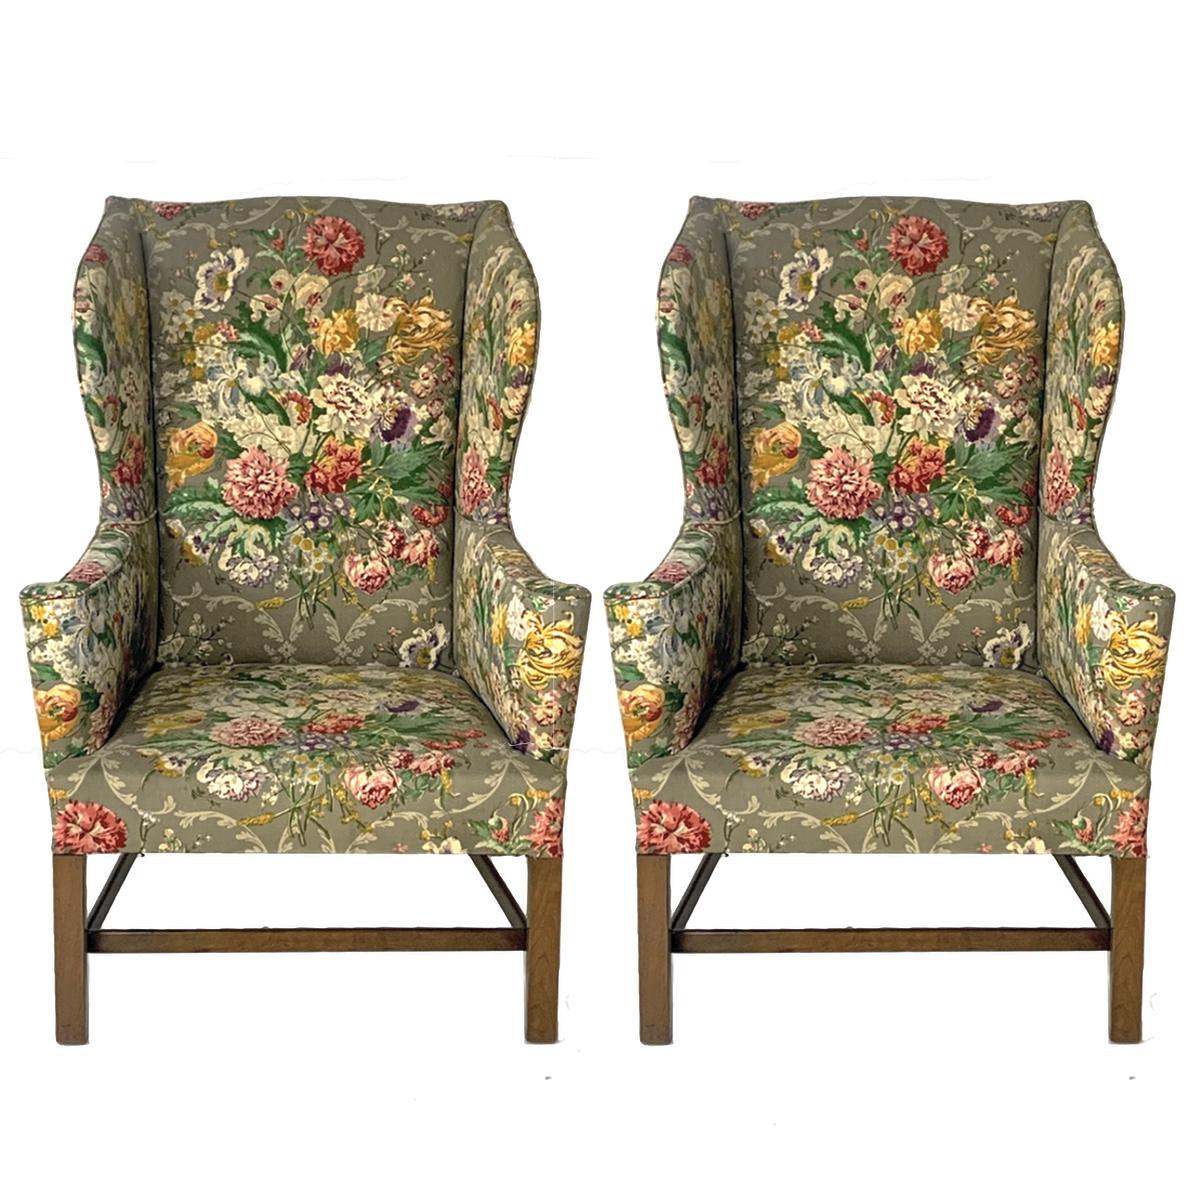 These chairs were obtained from an old Vermont estate full of very early American treasures. The upholstery is near excellent and absolutely stunning.